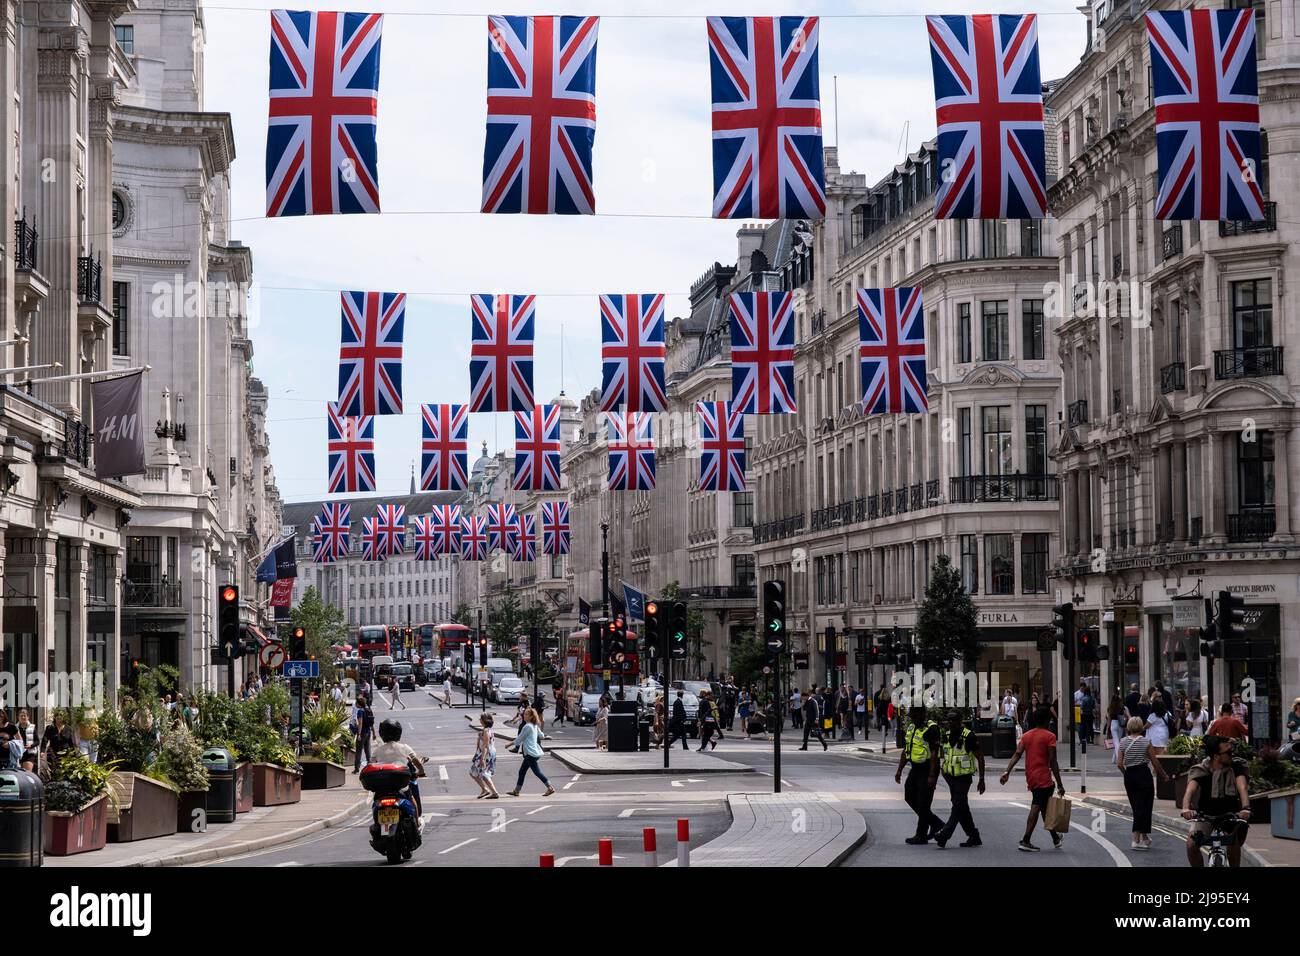 Union Flags hanging high above Regent Street in celebration of Queen Elizabeth IIs upcoming Platinum Jubilee on 17th May 2022 in London, United Kingdom. In 2022, Her Majesty The Queen Elizabeth II will become the first British Monarch to celebrate a Platinum Jubilee to mark the 70th anniversary of her accession to the throne on 6 February 1952. Oxford Street is a major retail centre in the West End of the capital and is Europes busiest shopping street with around half a million daily visitors to its approximately 300 shops, the majority of which are fashion and clothing stores. Stock Photo